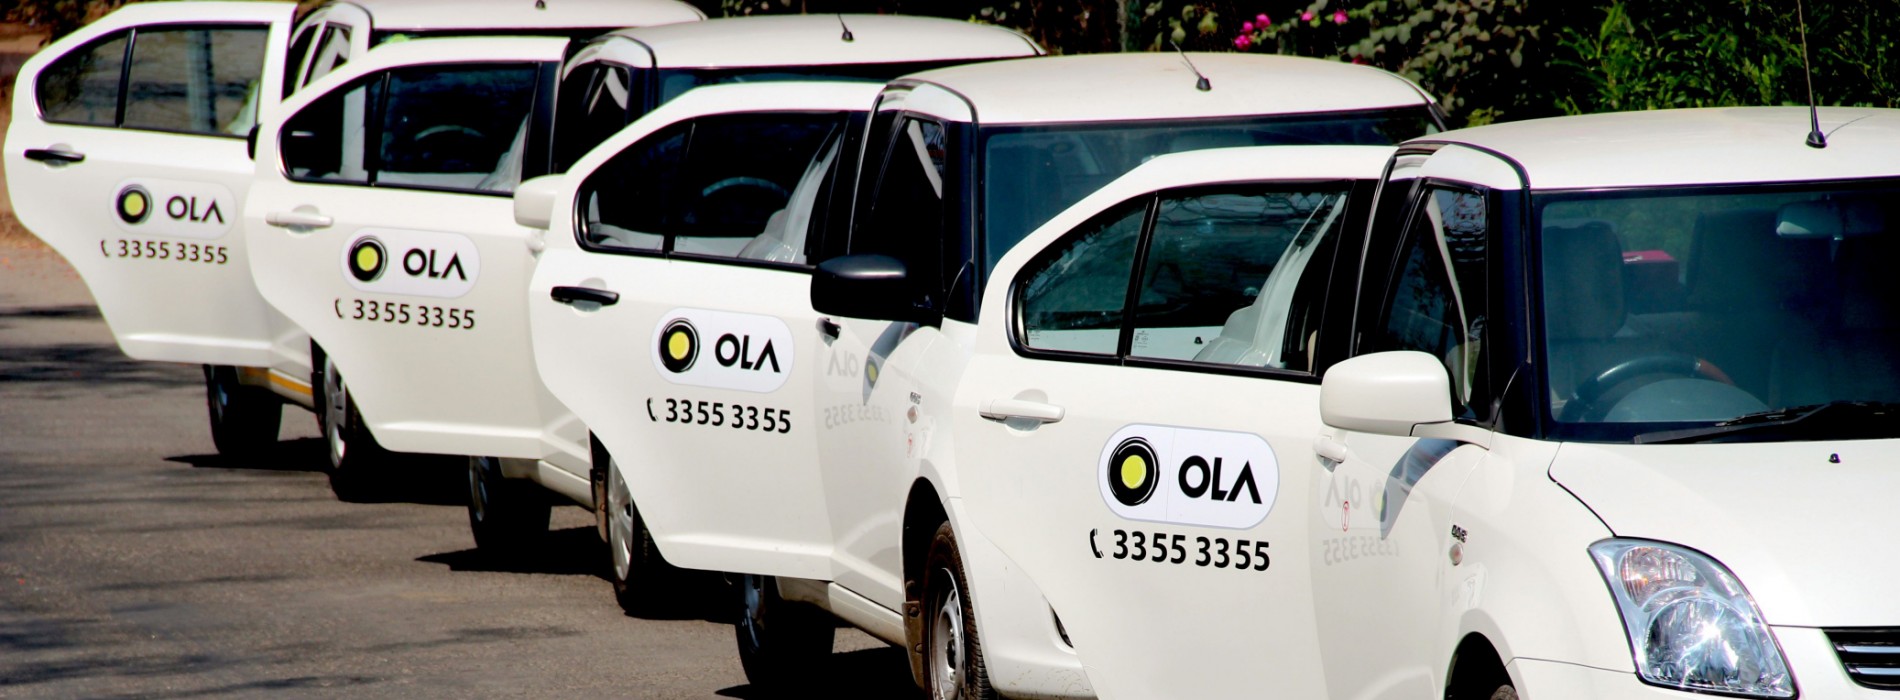 Ride with Ola and win a getaway to Mauritius from SOTC